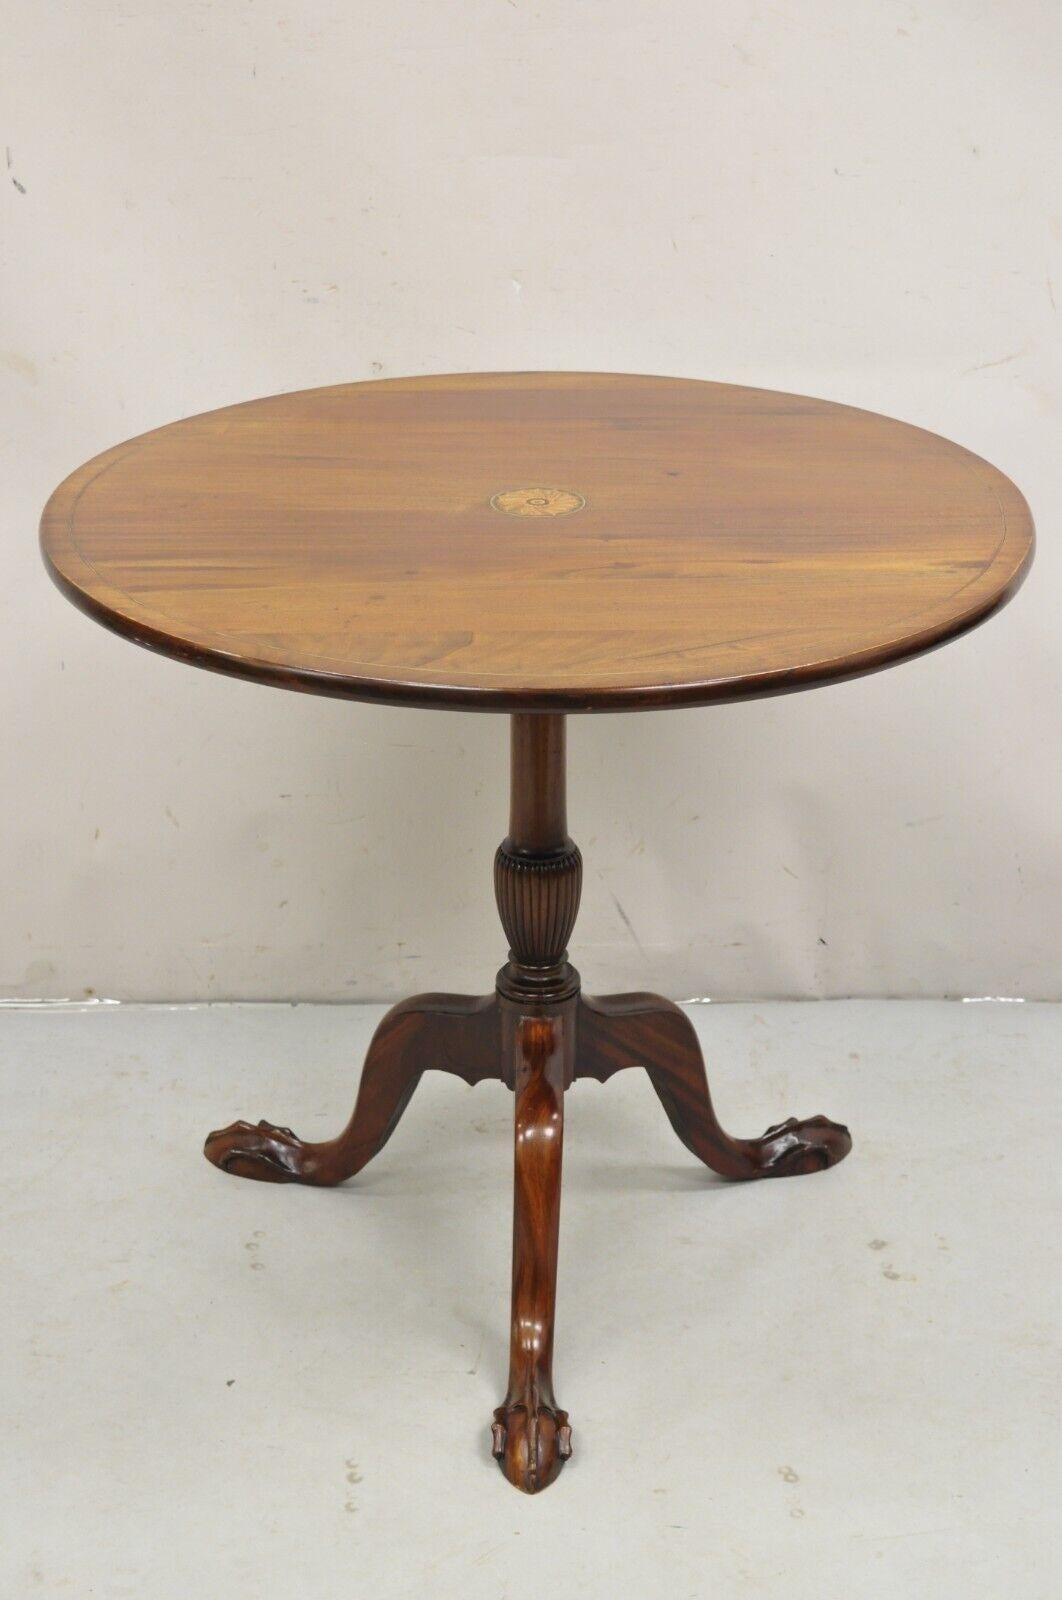 Antique Chippendale Style Round Tilt Top Pinwheel Inlay Ball and Claw Side Table. Item features tapered ball and claw feet, pinwheel and pencil inlay to top, beautiful wood grain, very nice antique table. Circa Early 20th Century.
Measurements: